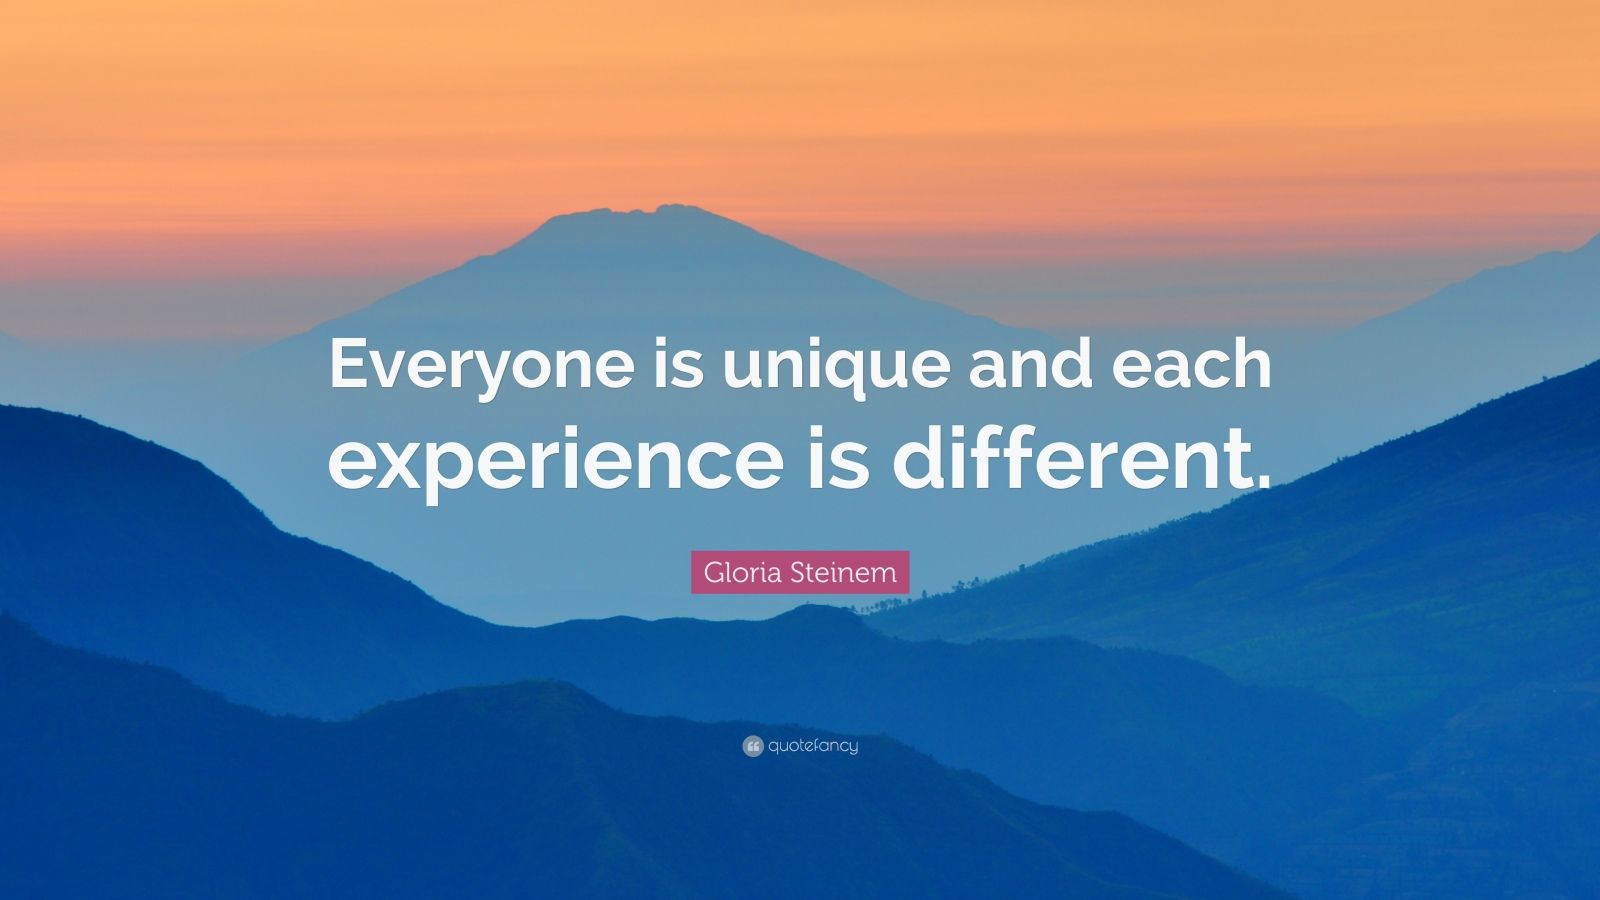 Gloria Steinem Quote: “Everyone is unique and each experience is